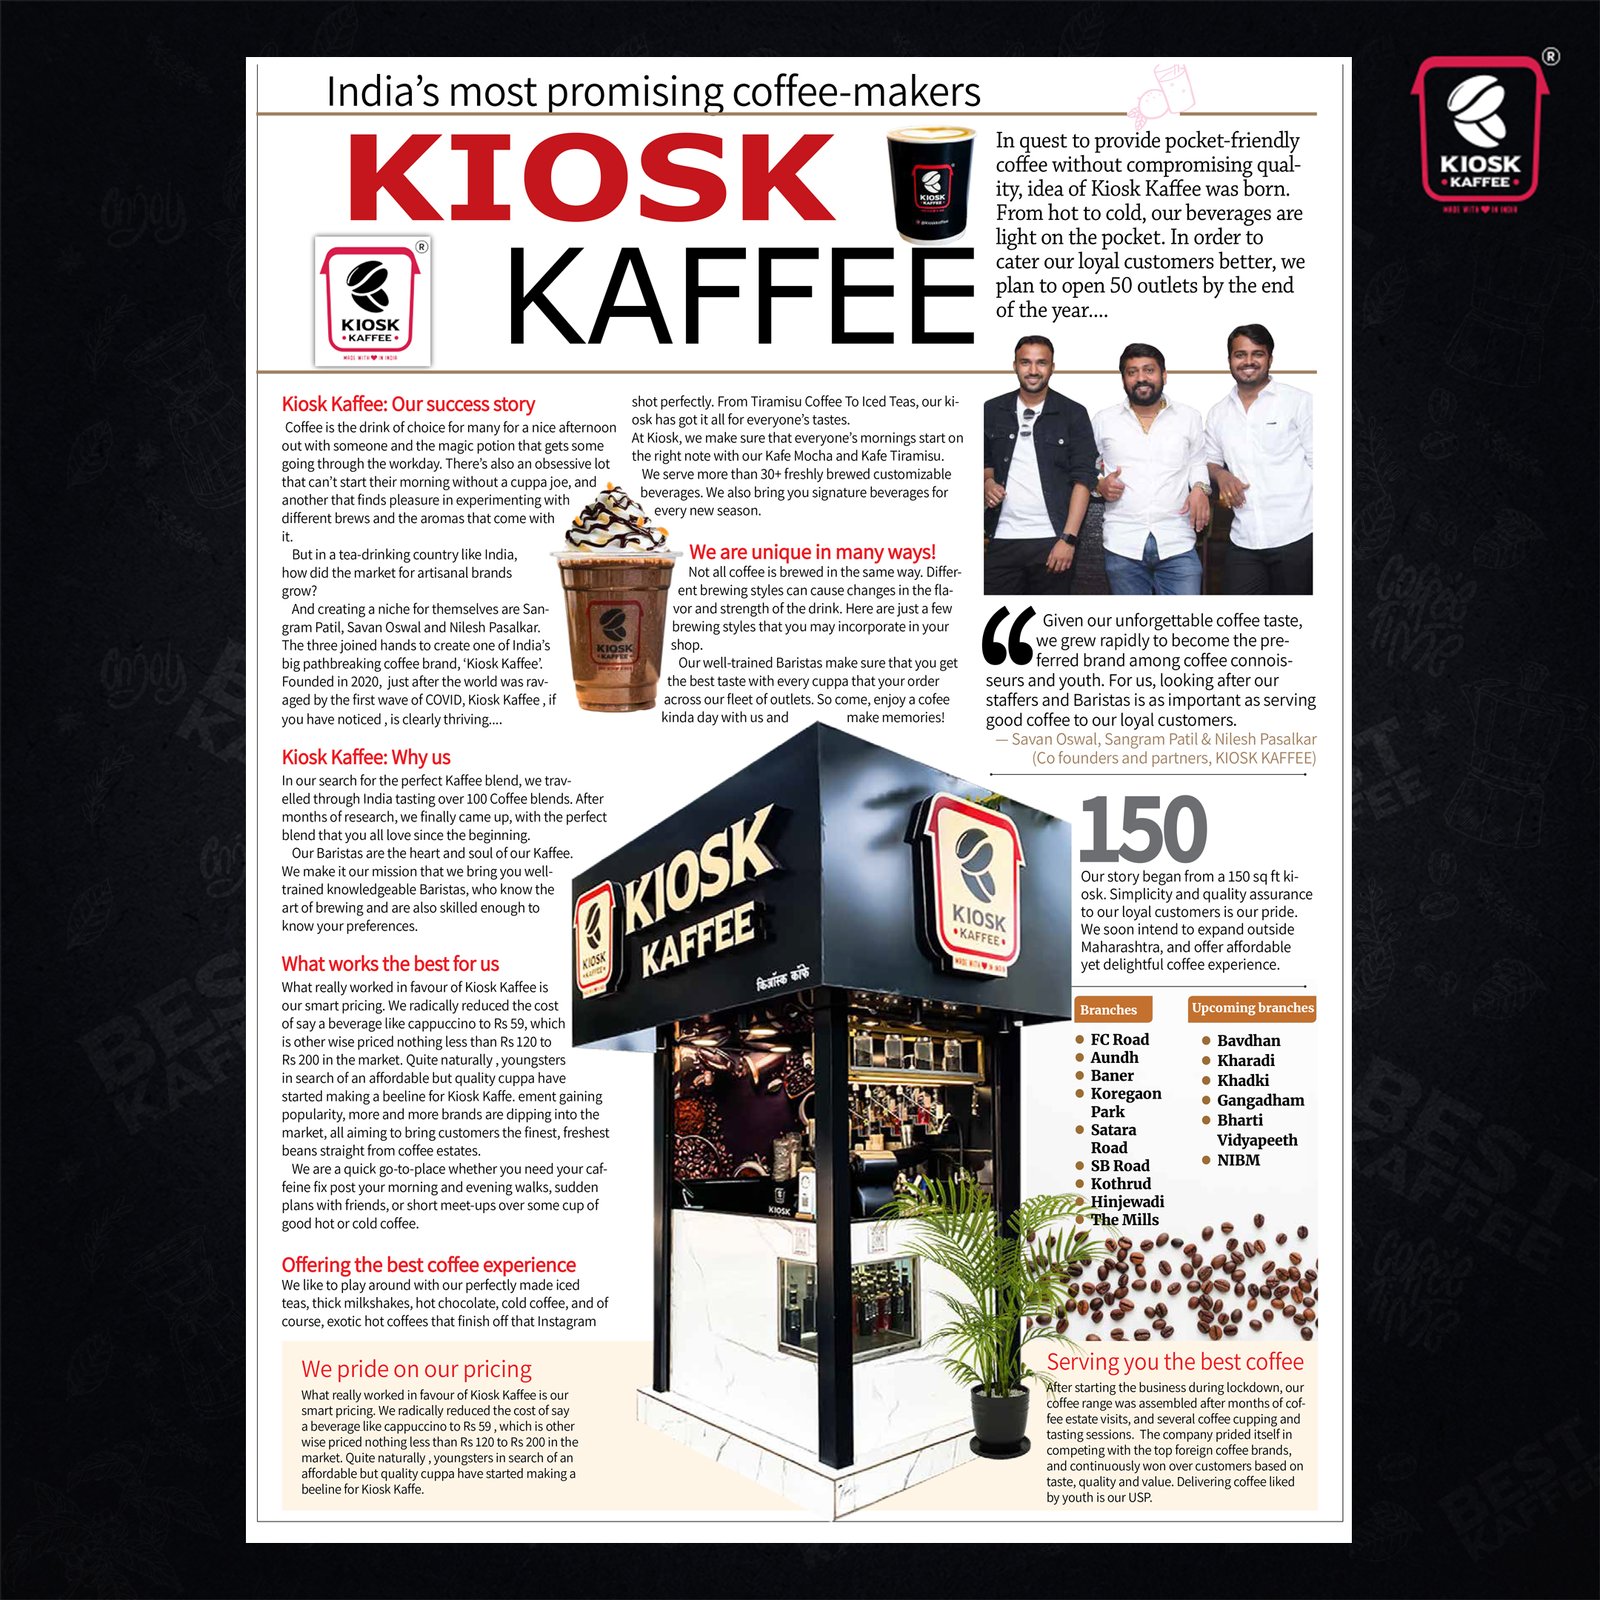 India’s most promising coffee-makers – Kiosk Kaffee